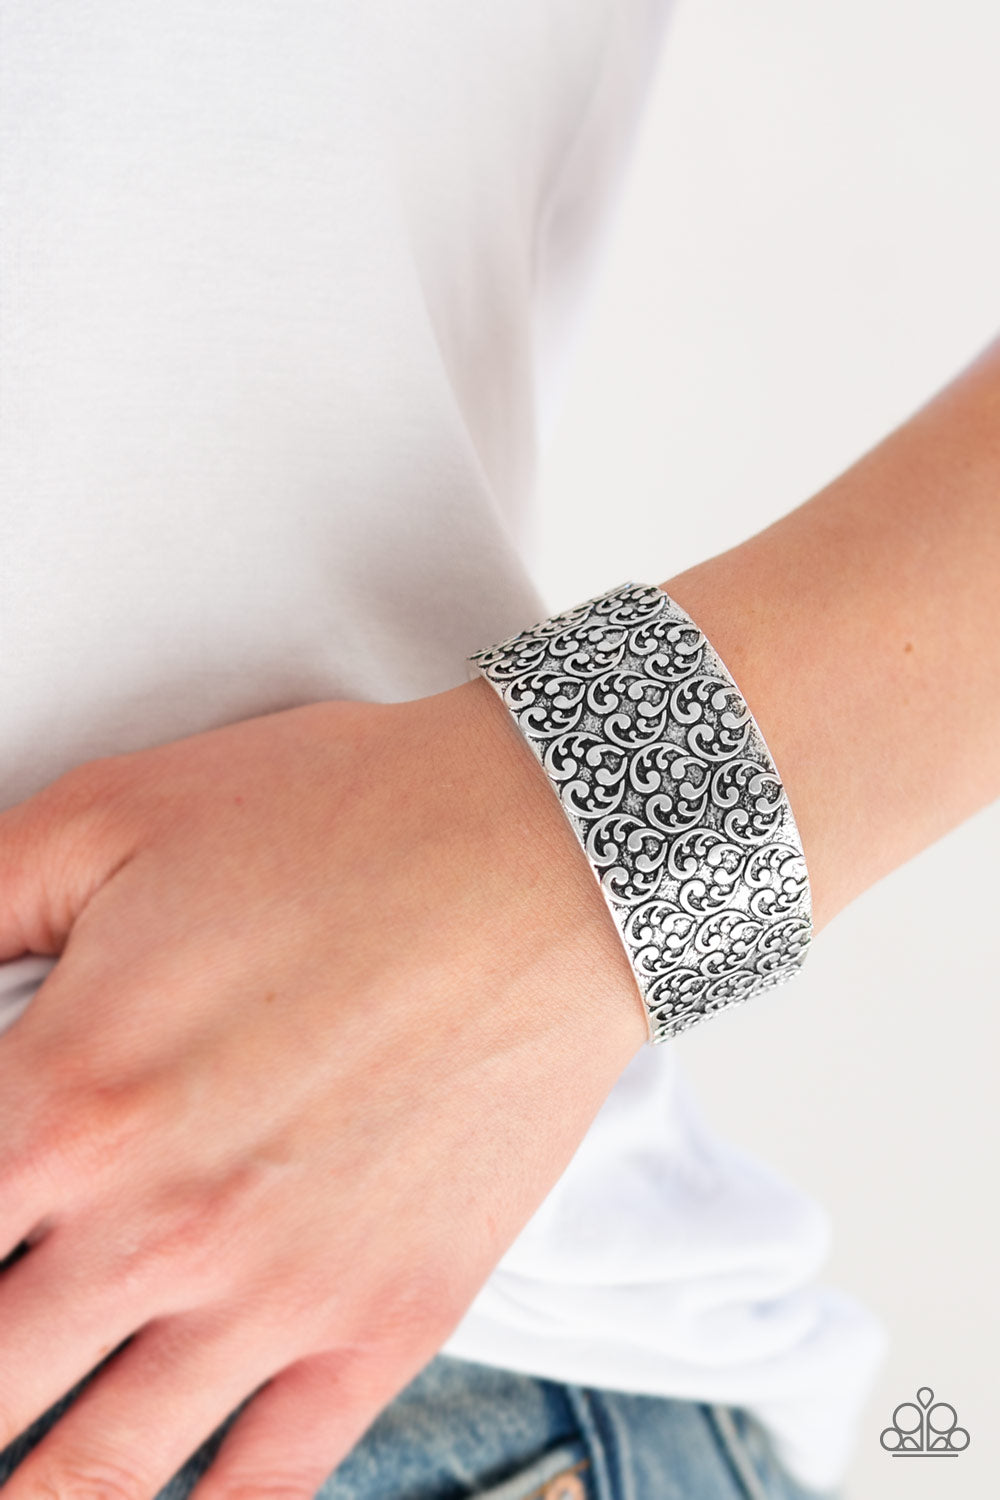 EAT YOUR HEART OUT - SILVER HEARTS FILIGREE CUFF BRACELET